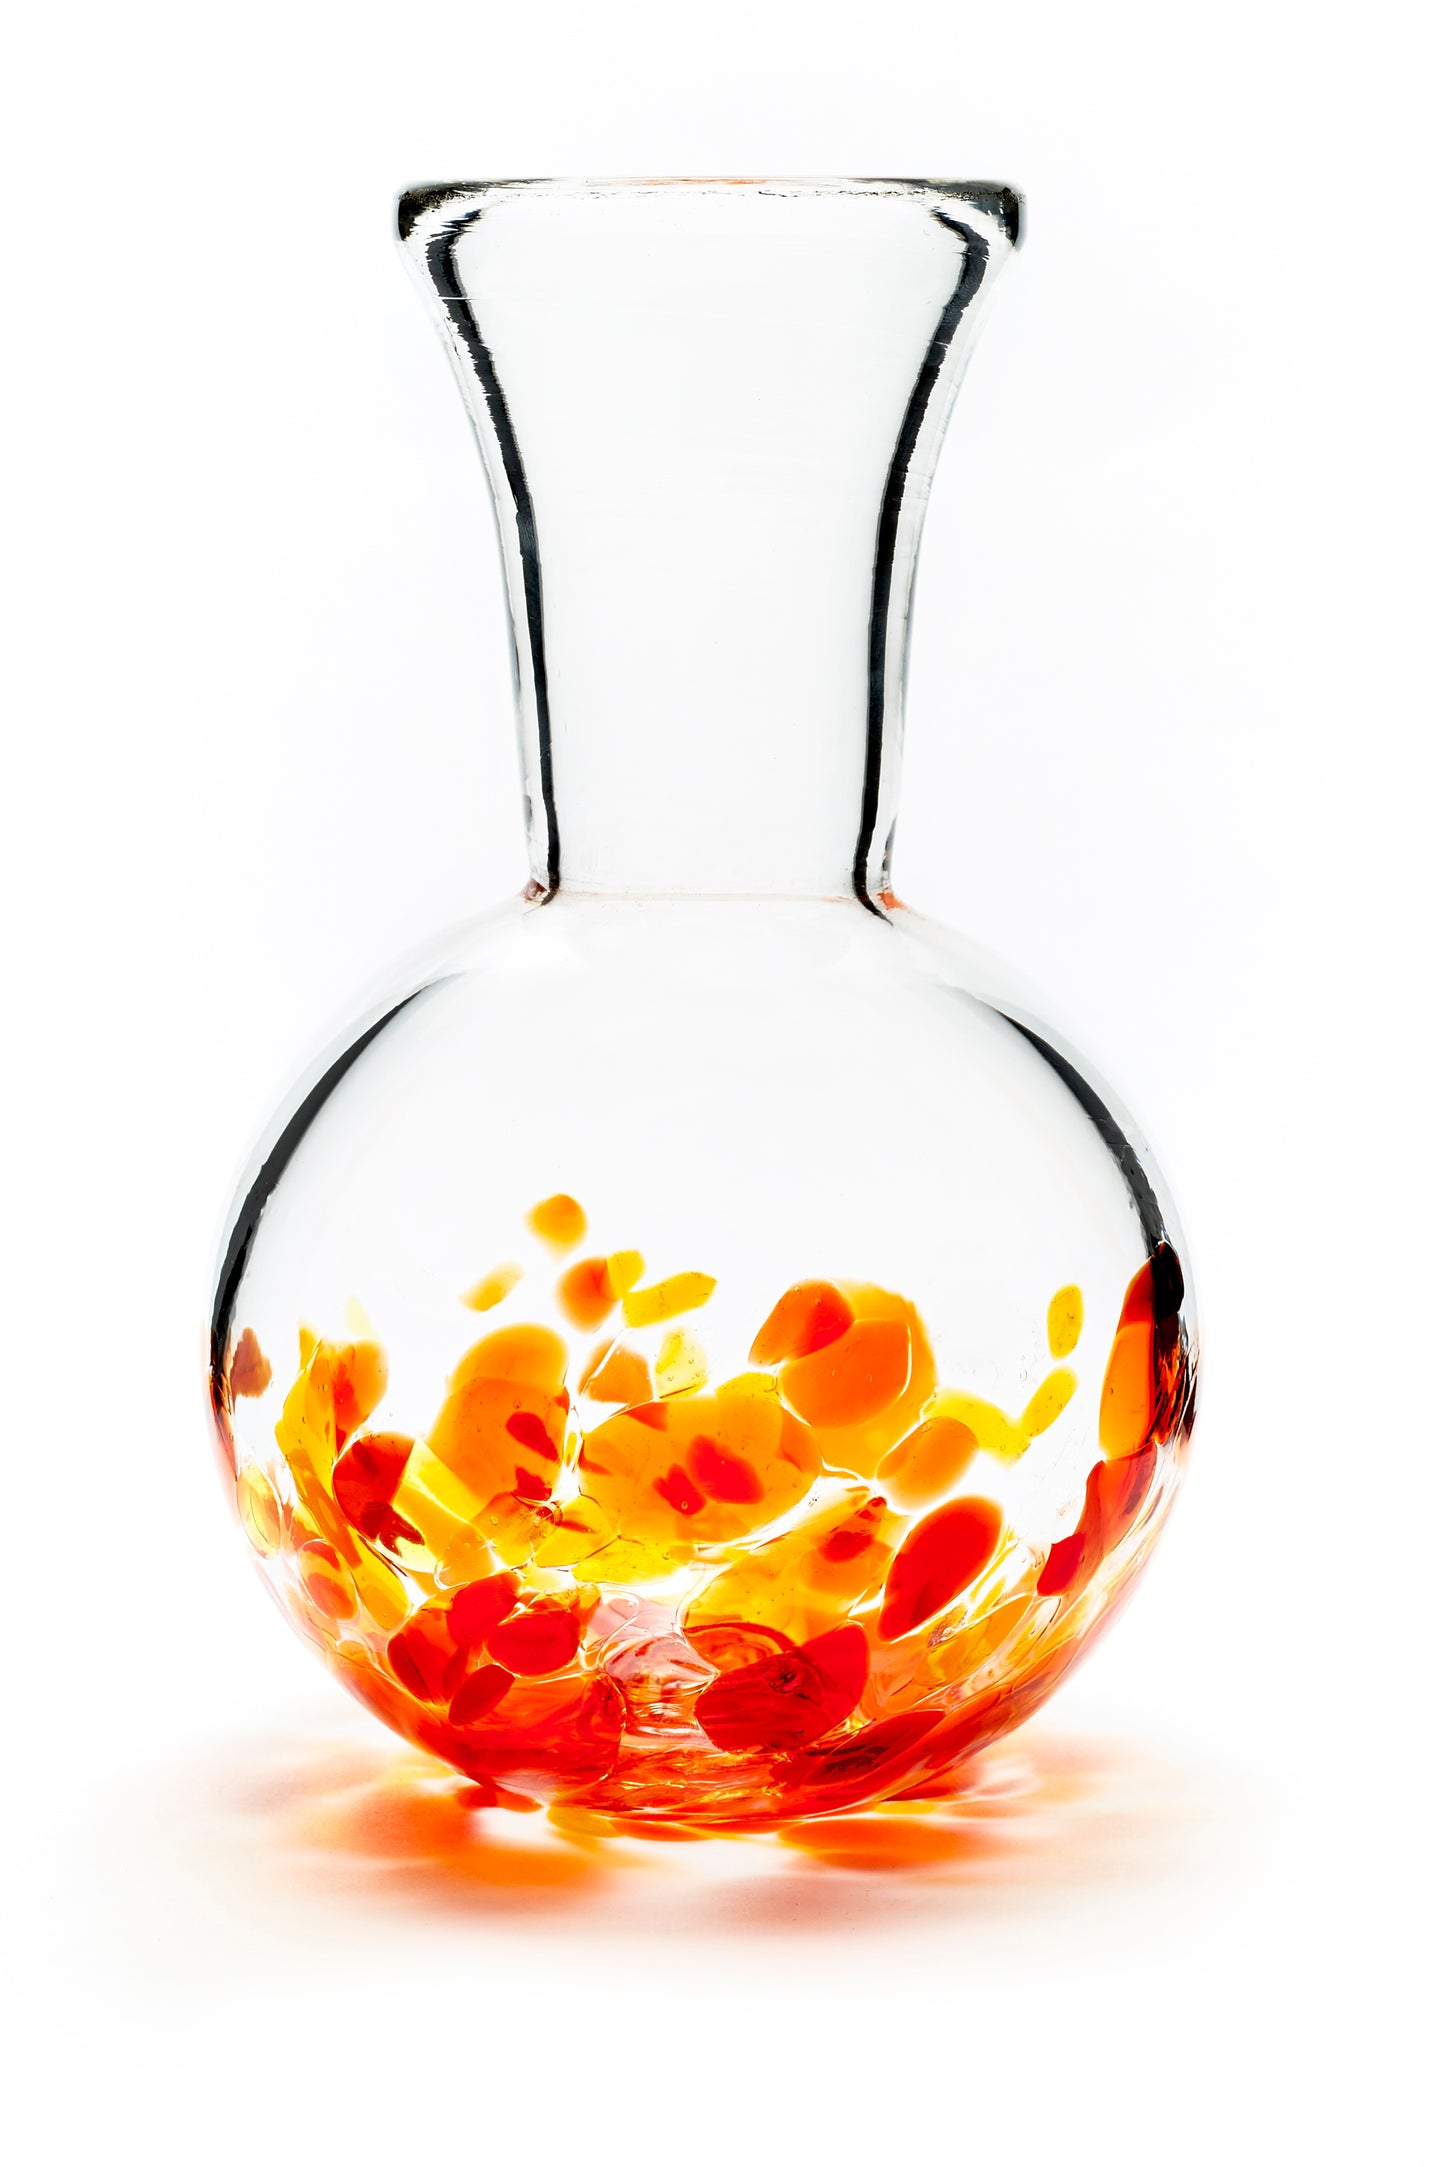 Hand blown glass vase. Red, yellow, and orange glass on the bottom. Colour combination is called "Sunburst."